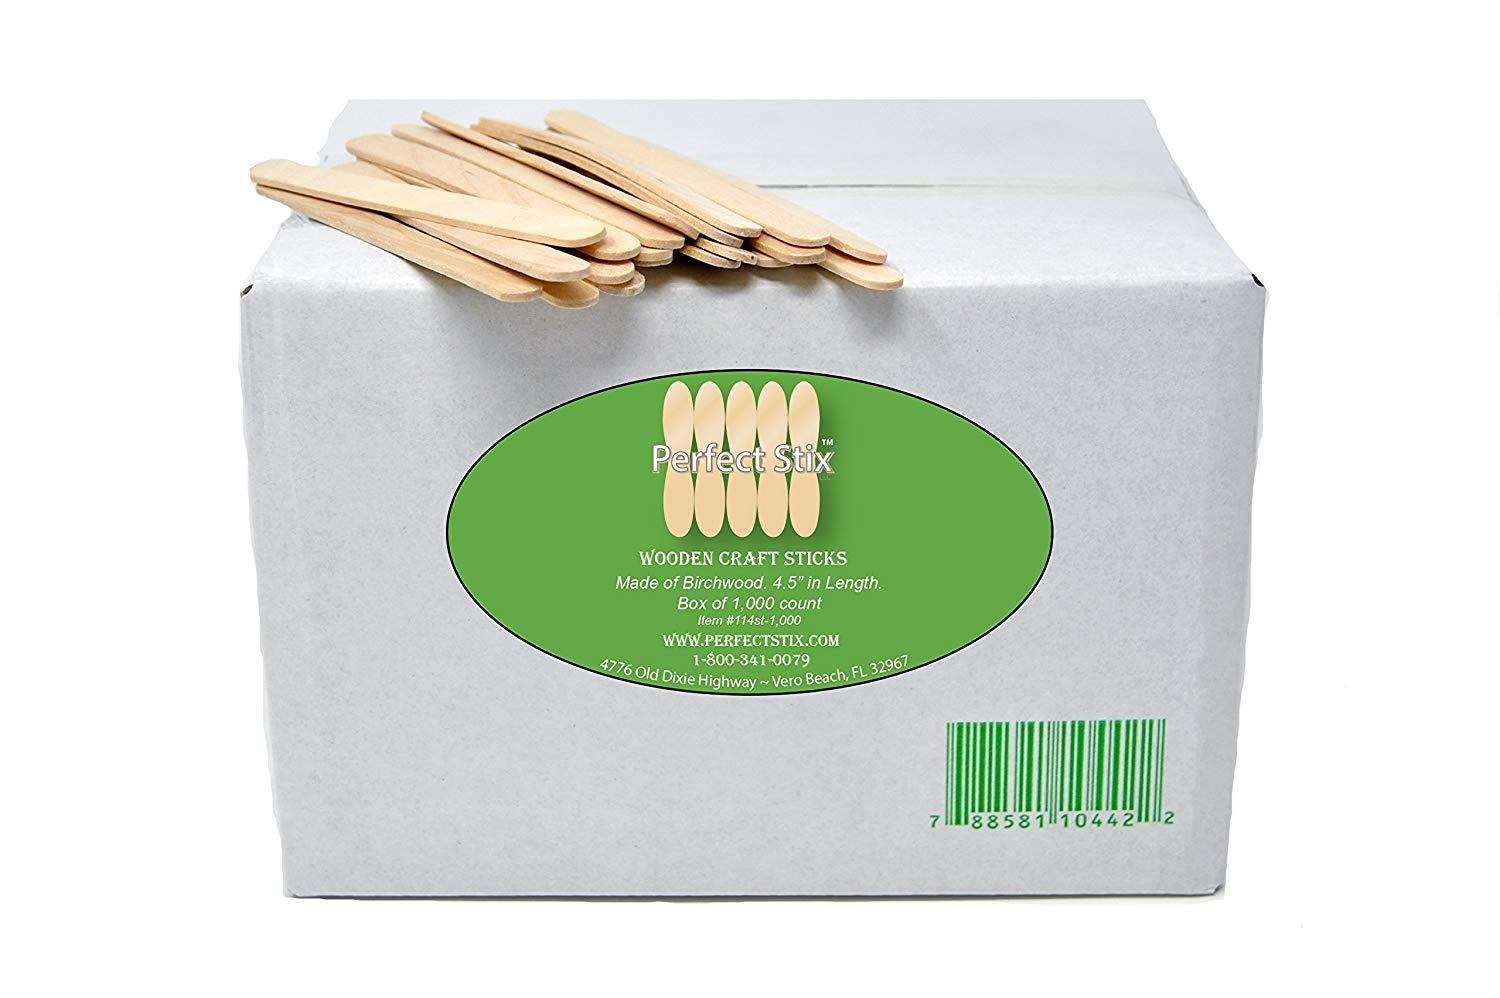  Green Popsicle Sticks for Crafts 4-1/2 inch, Pack of